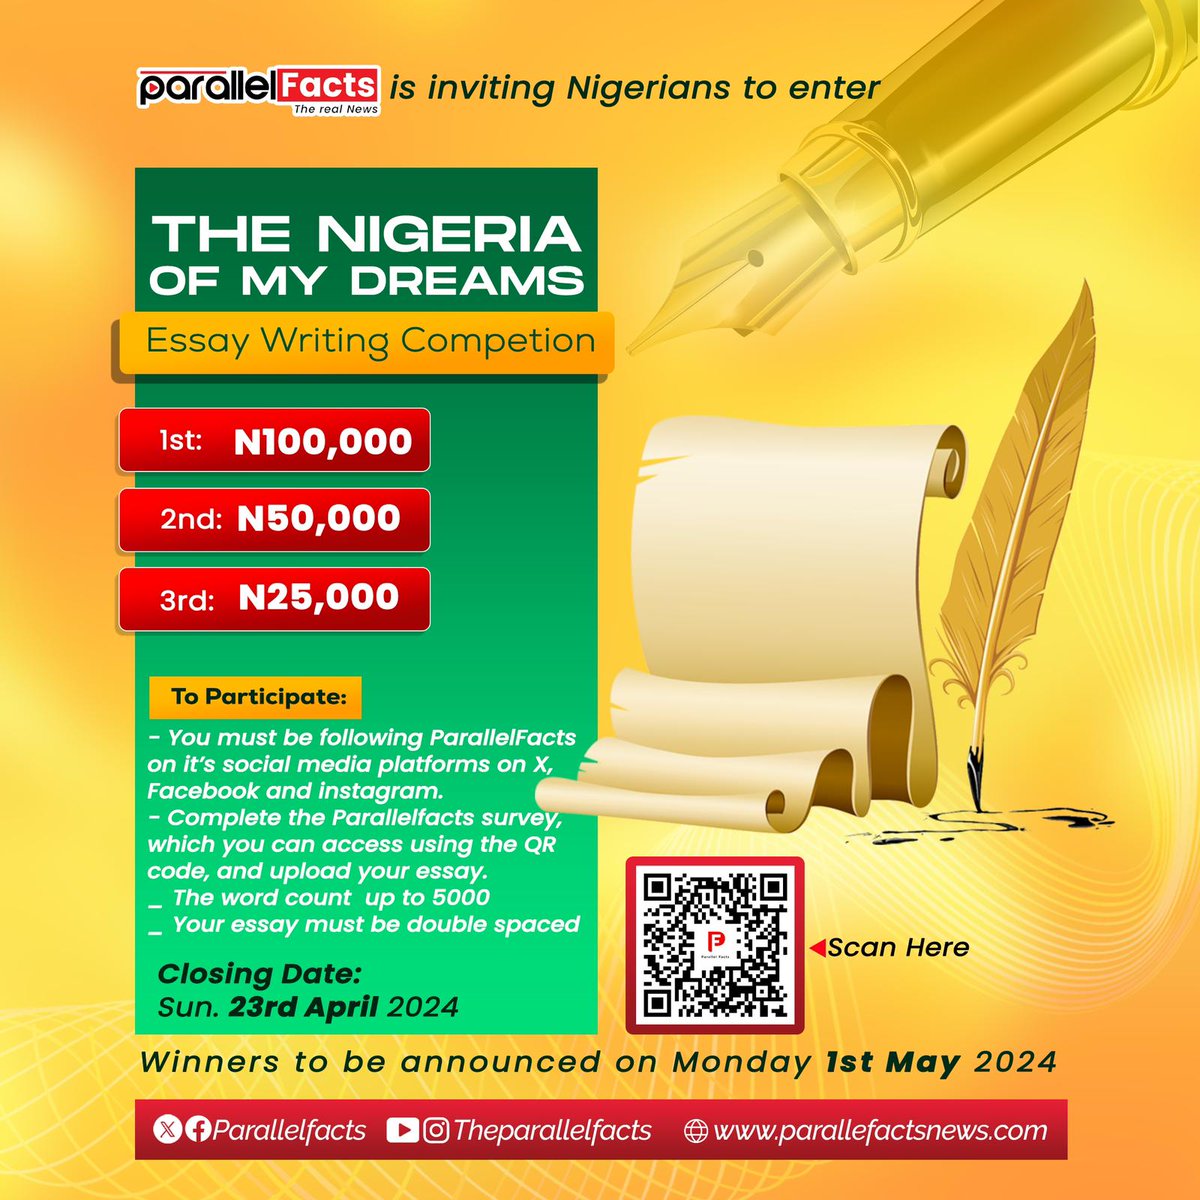 @ParallelFacts is inviting Nigerians to enter 'The Nigeria of My Dreams' essay writing competition. Please follow the instructions on the flier. We look forward to reading your essays!!! Good luck!